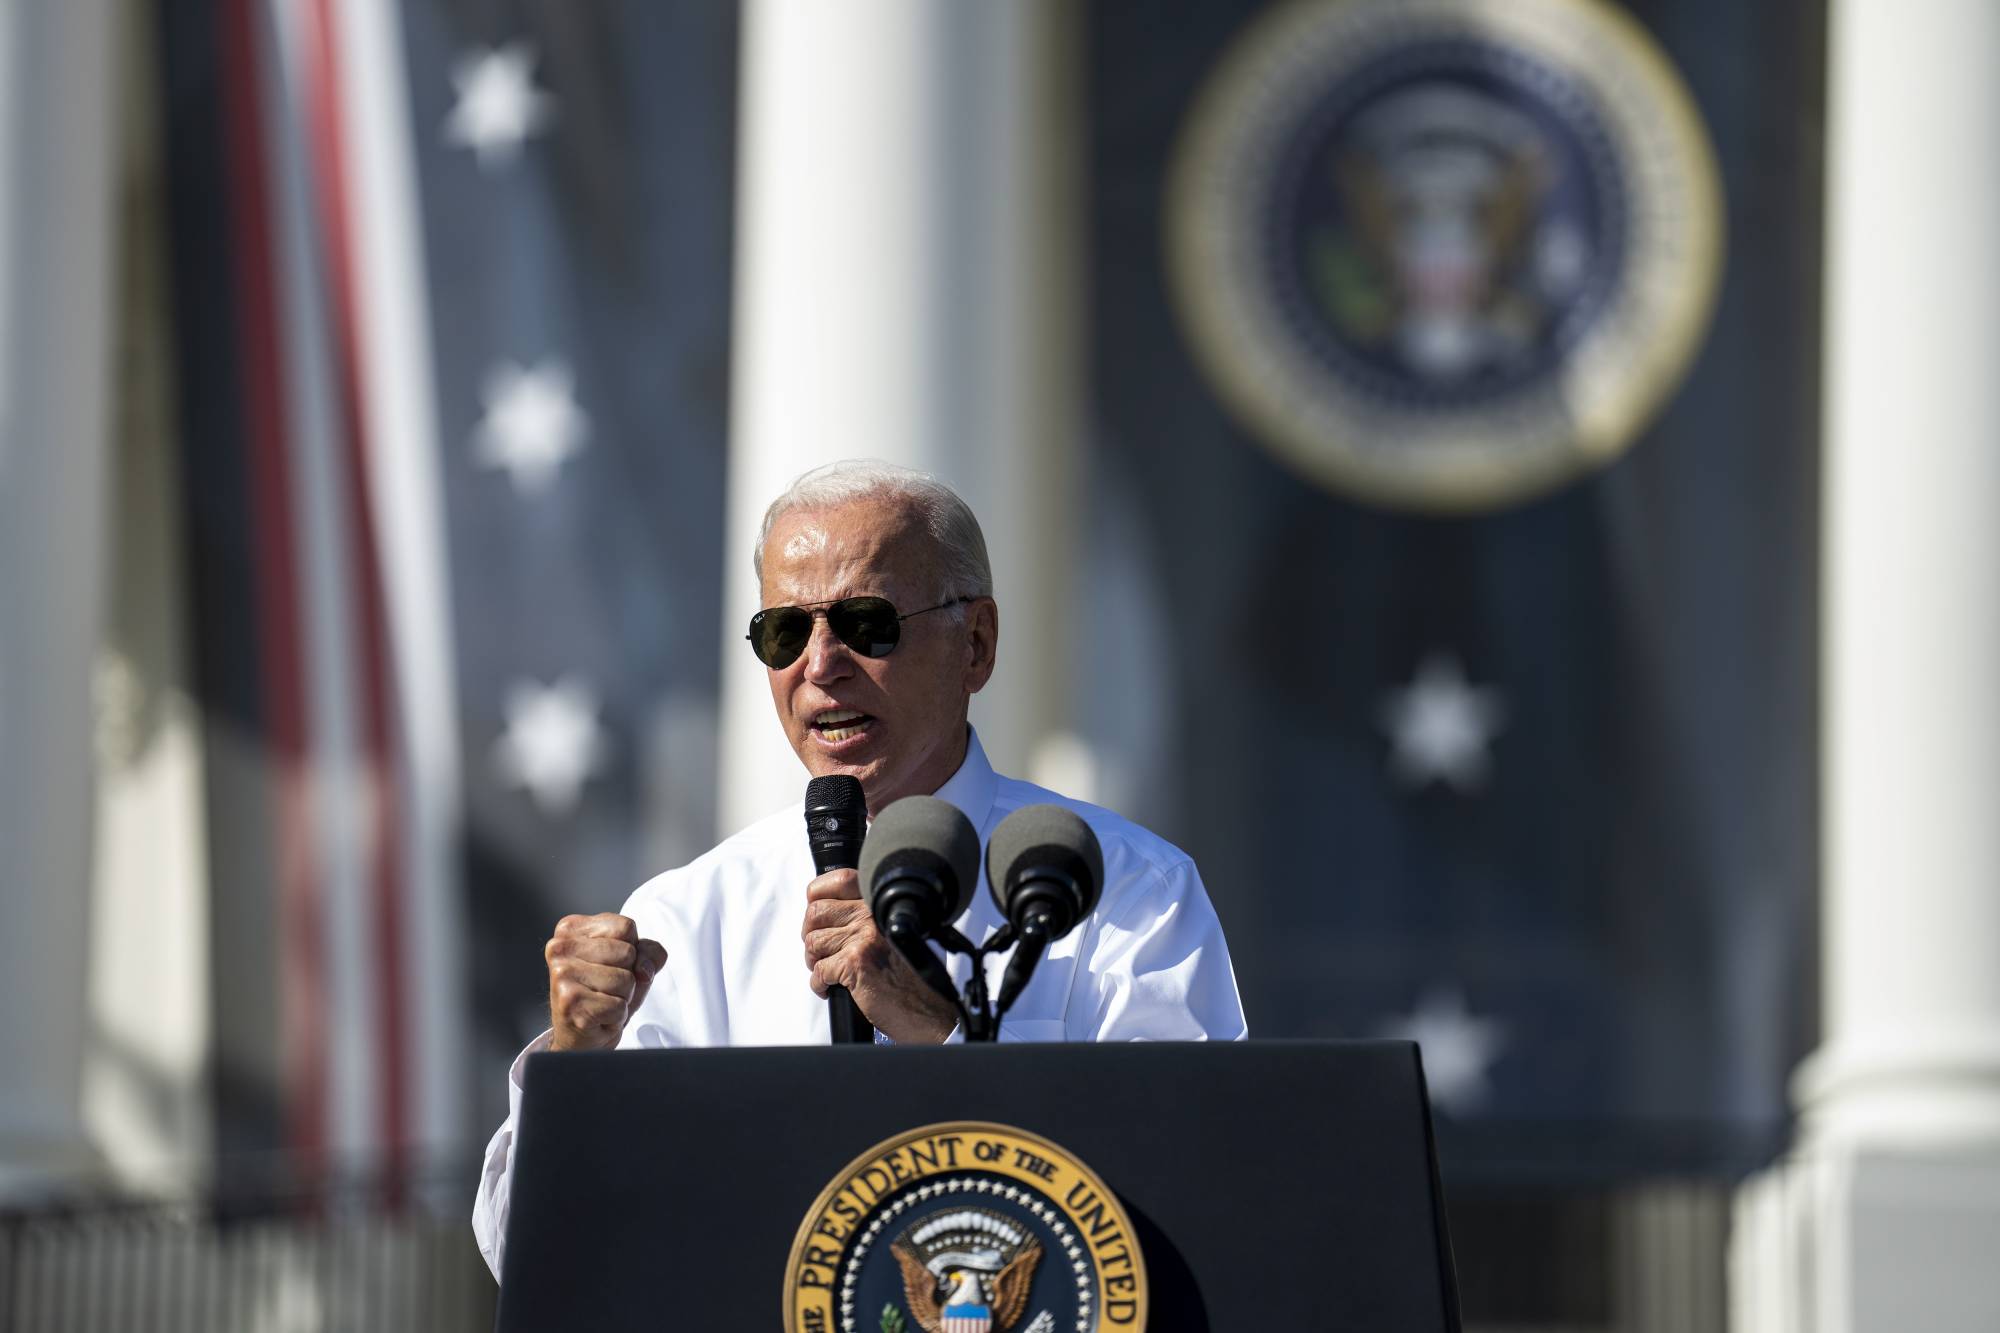 U.S. President Joe Biden delivers remarks at an event on the South Lawn of the White House in Washington on Sept. 13.  | DOUG MILLS / THE NEW YORK TIMES